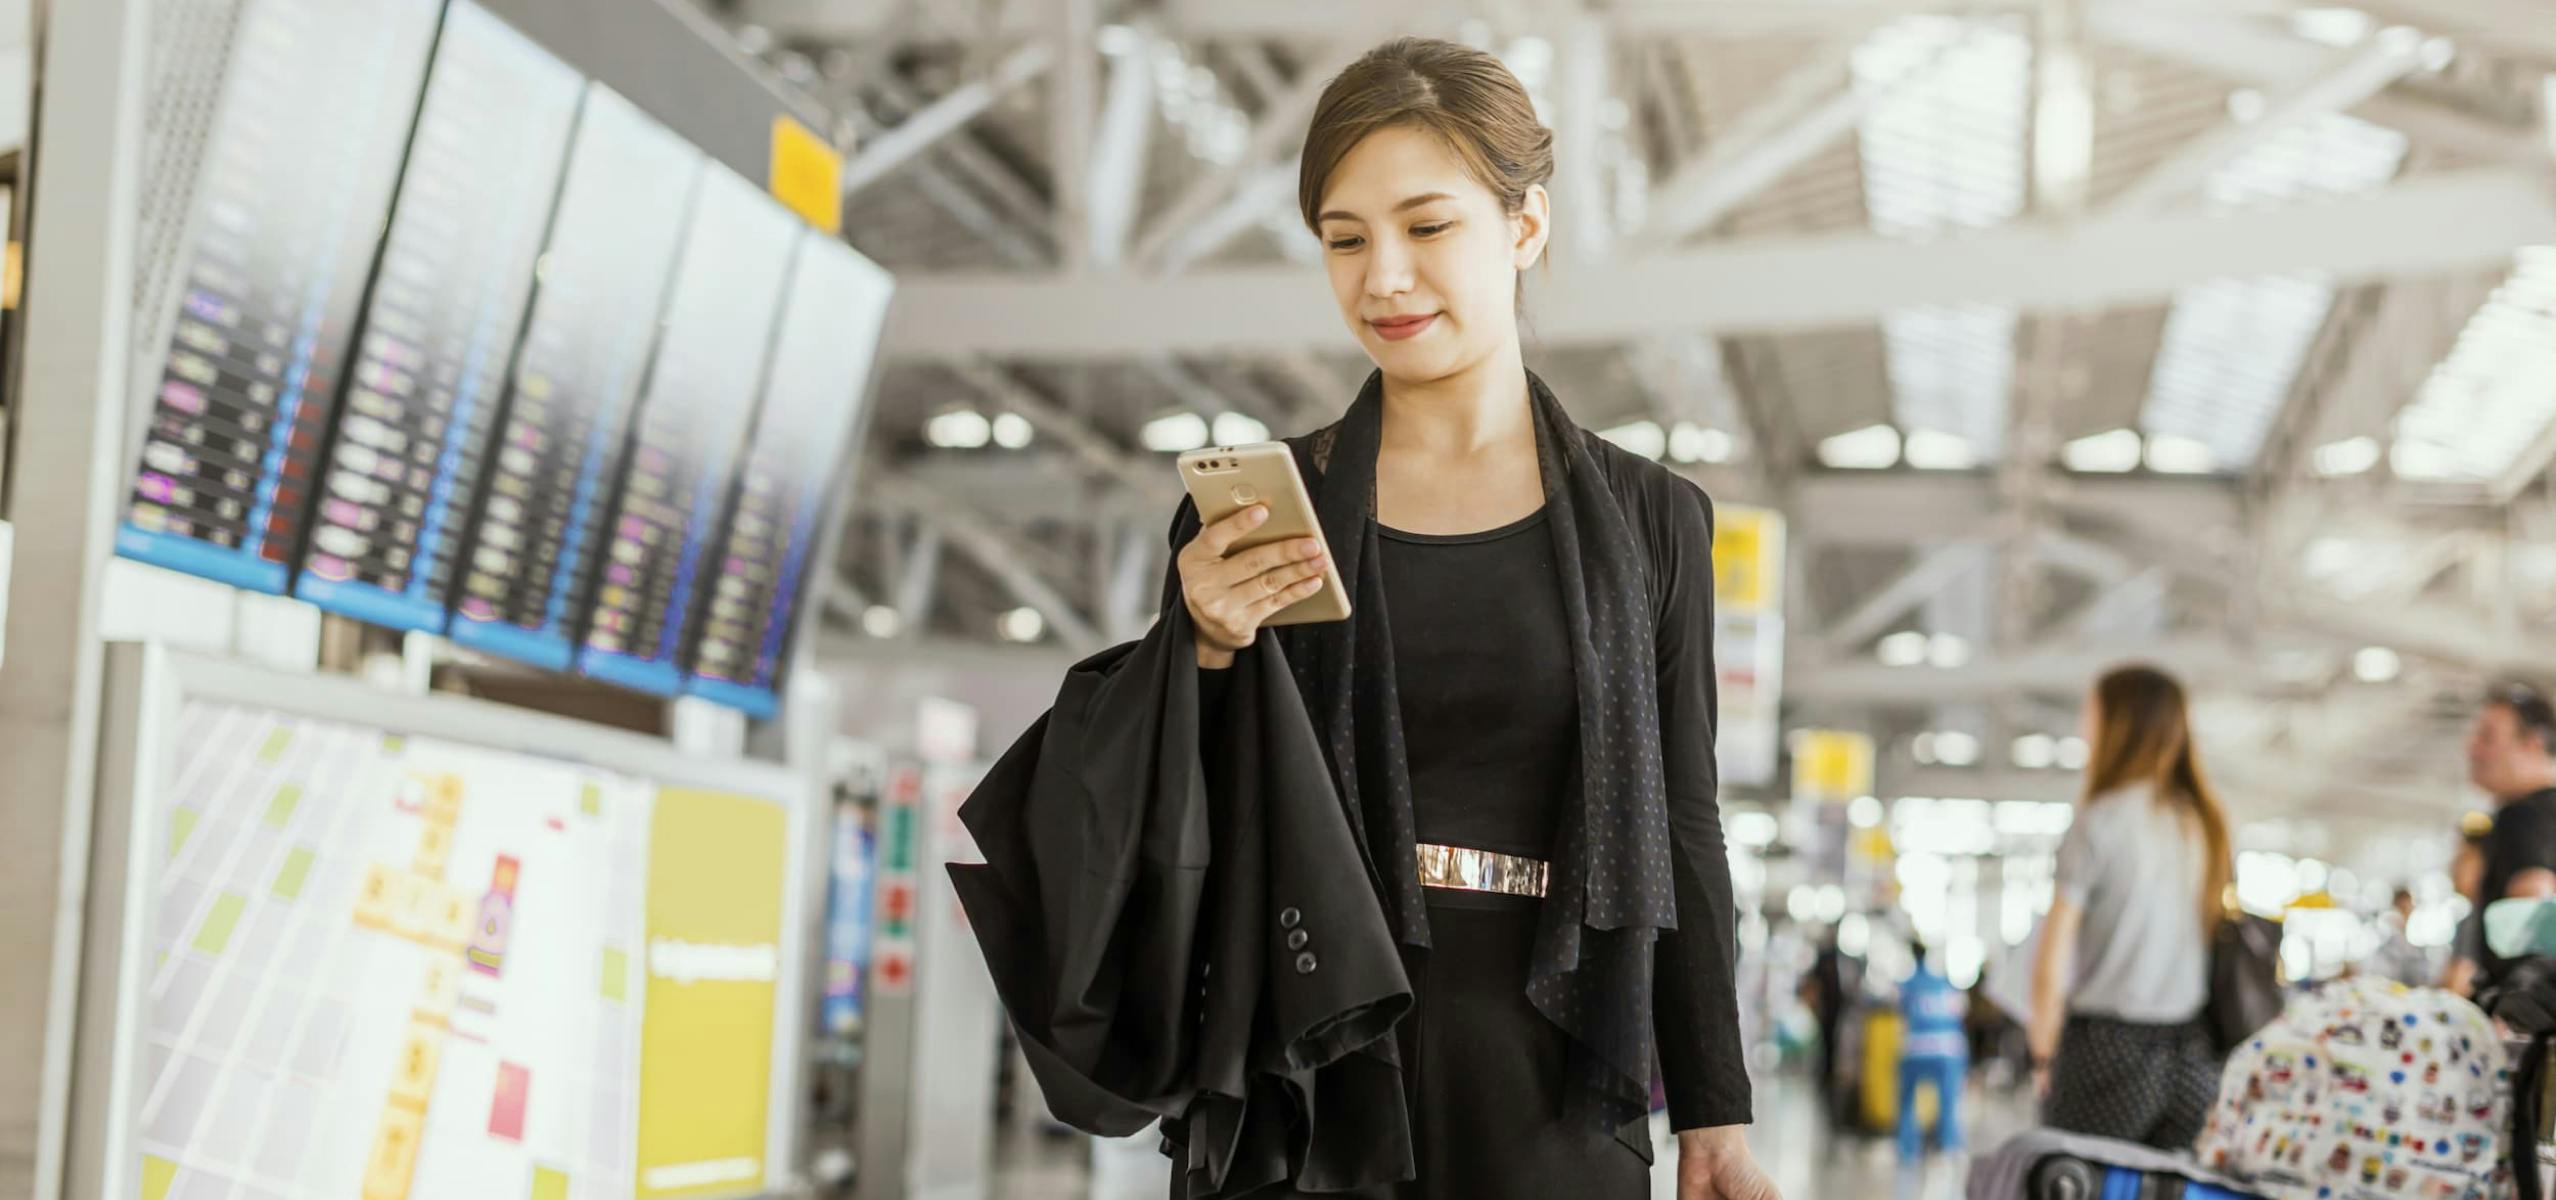 Woman in business clothes walking through an airport looking at her phone and holding a jacket.